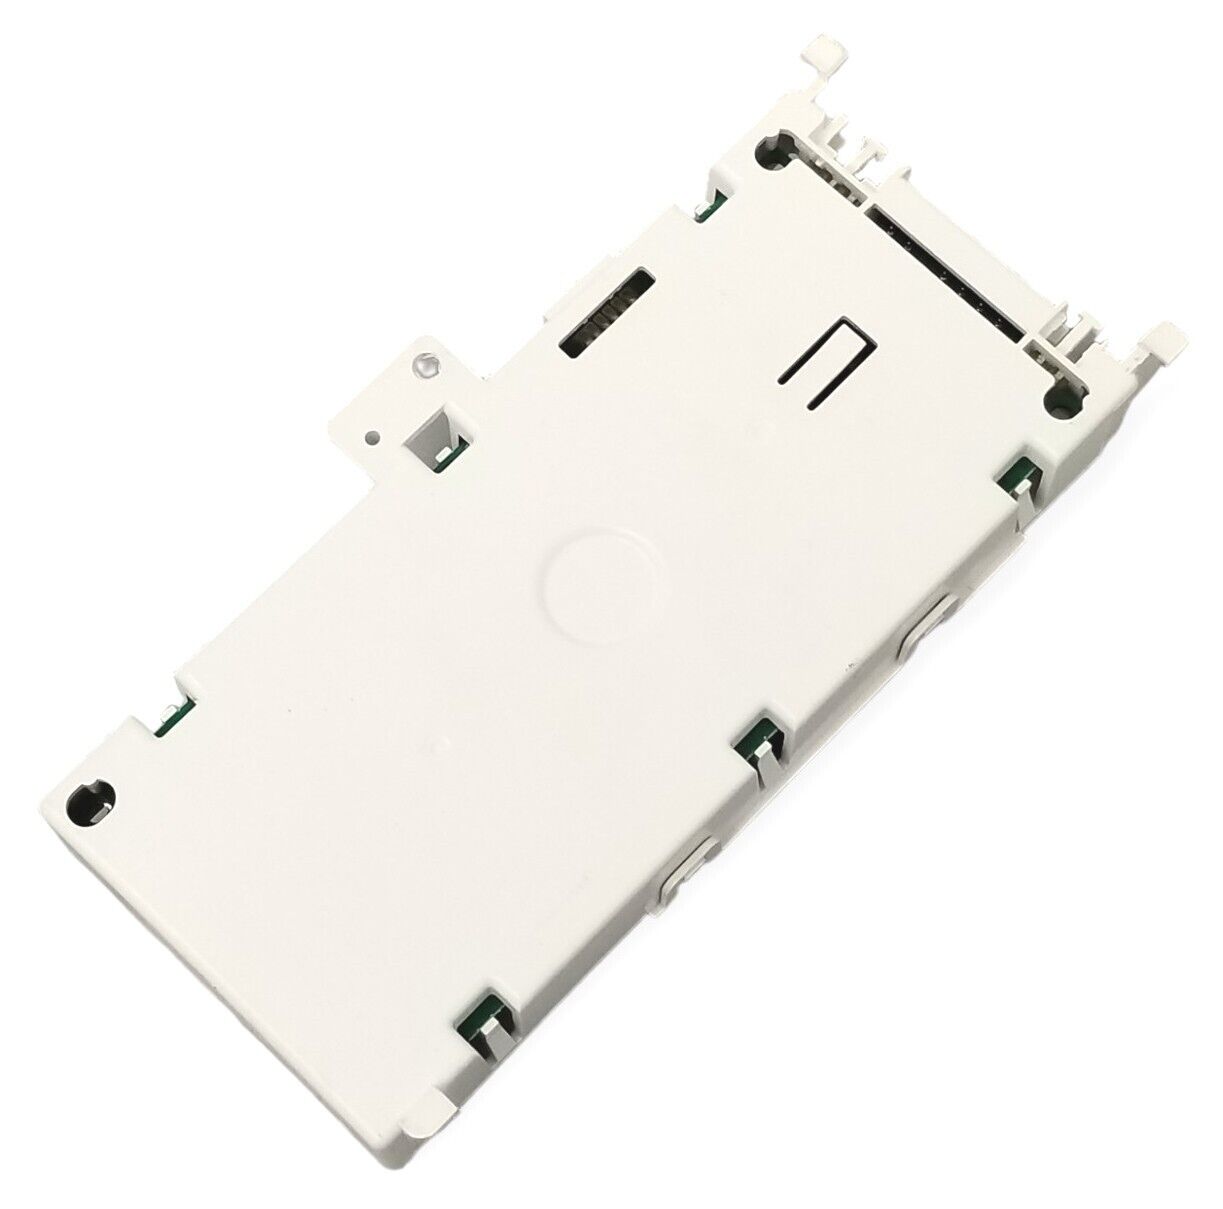 OEM Replacement for Whirlpool Dryer Control W10249827 W10249826   ⭐  ⭐